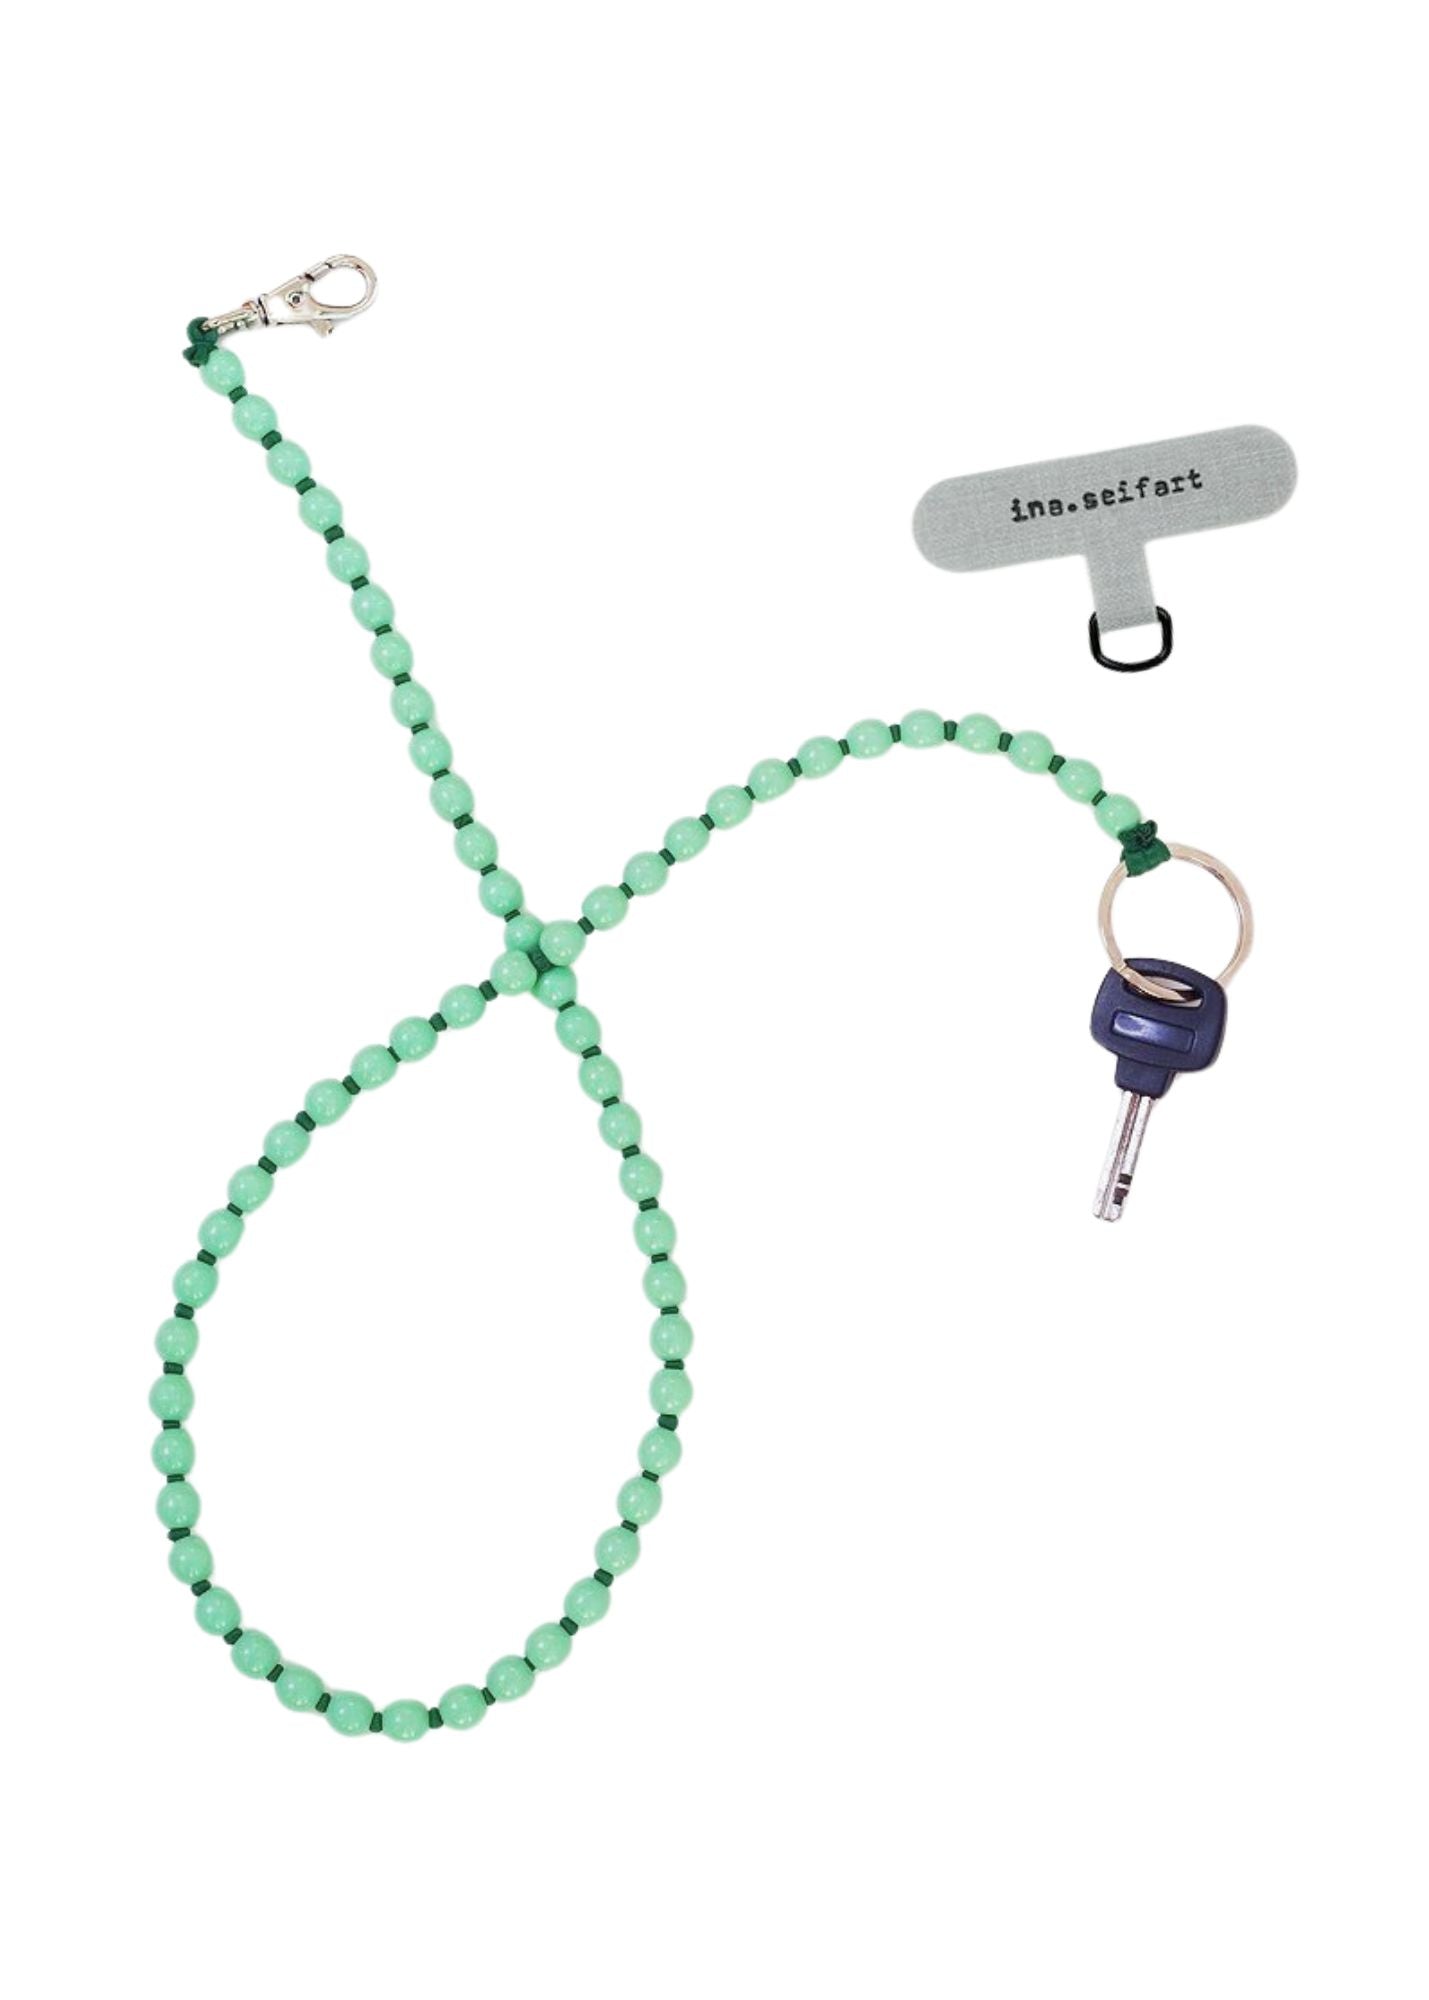 INA SEIFART BIG BEADED PHONE NECKLACE AND ADAPTER